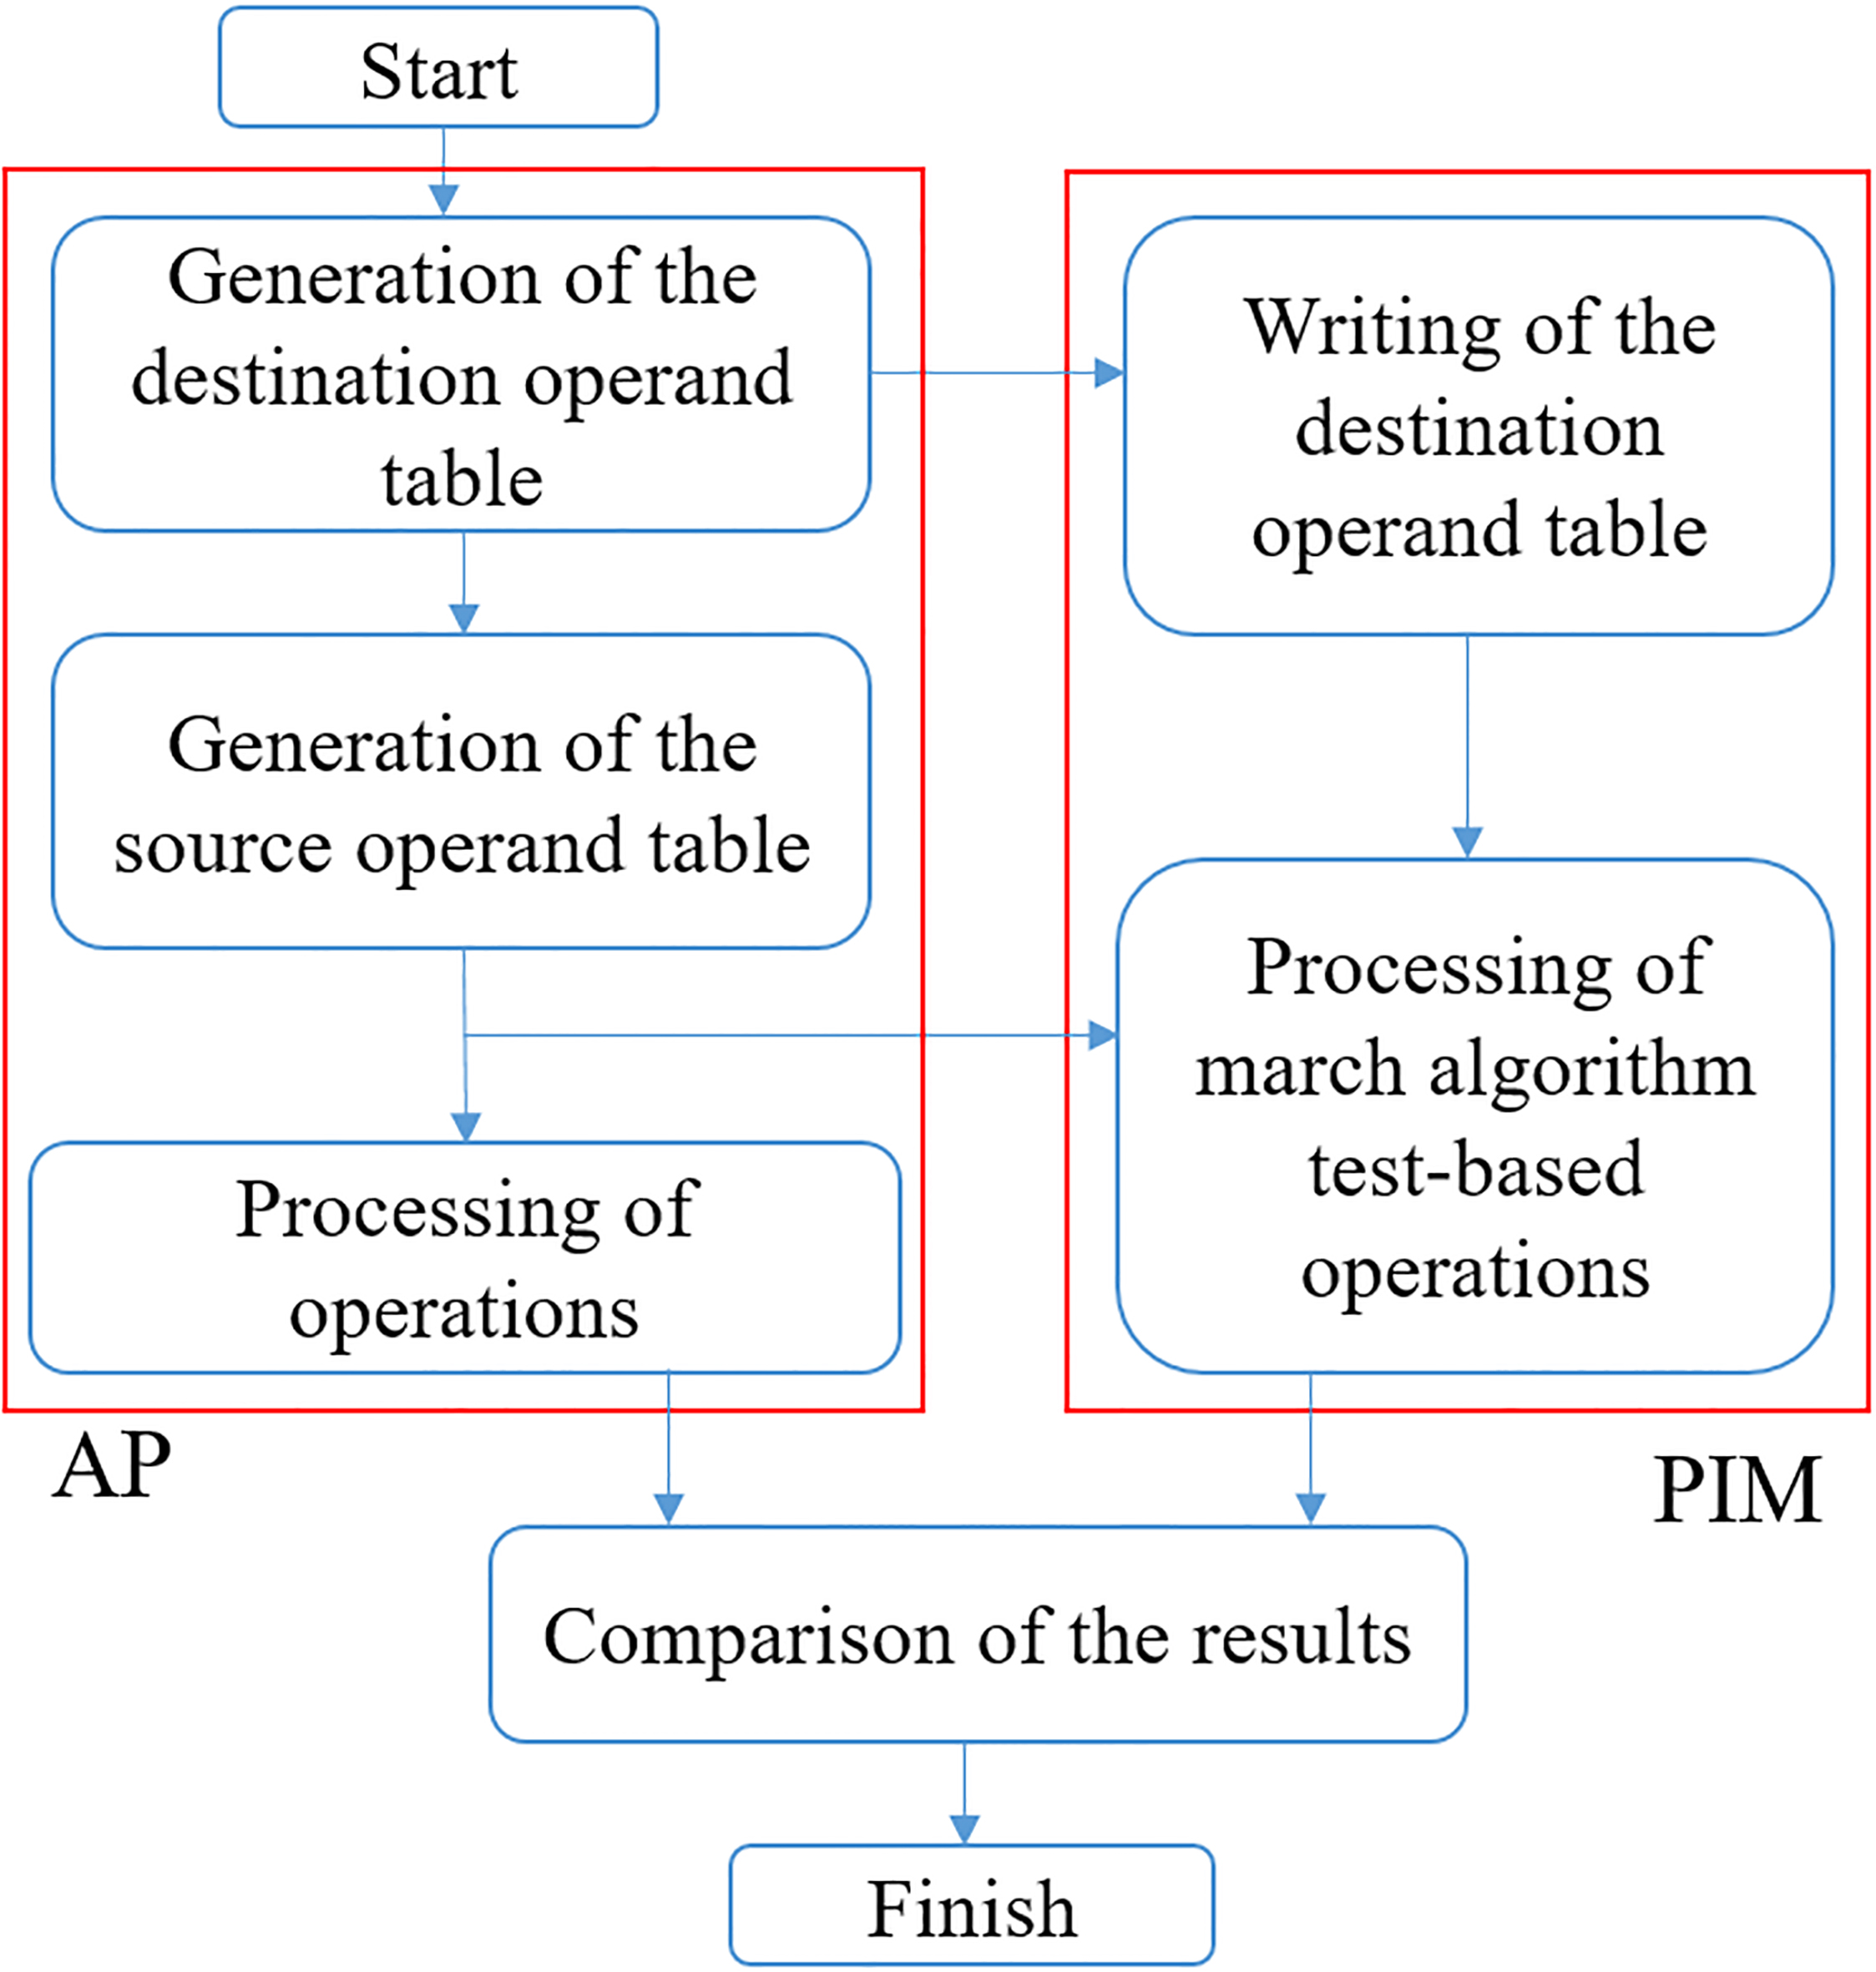 Flowchart of test operations based on the pattern tests from the MARCH algorithm.